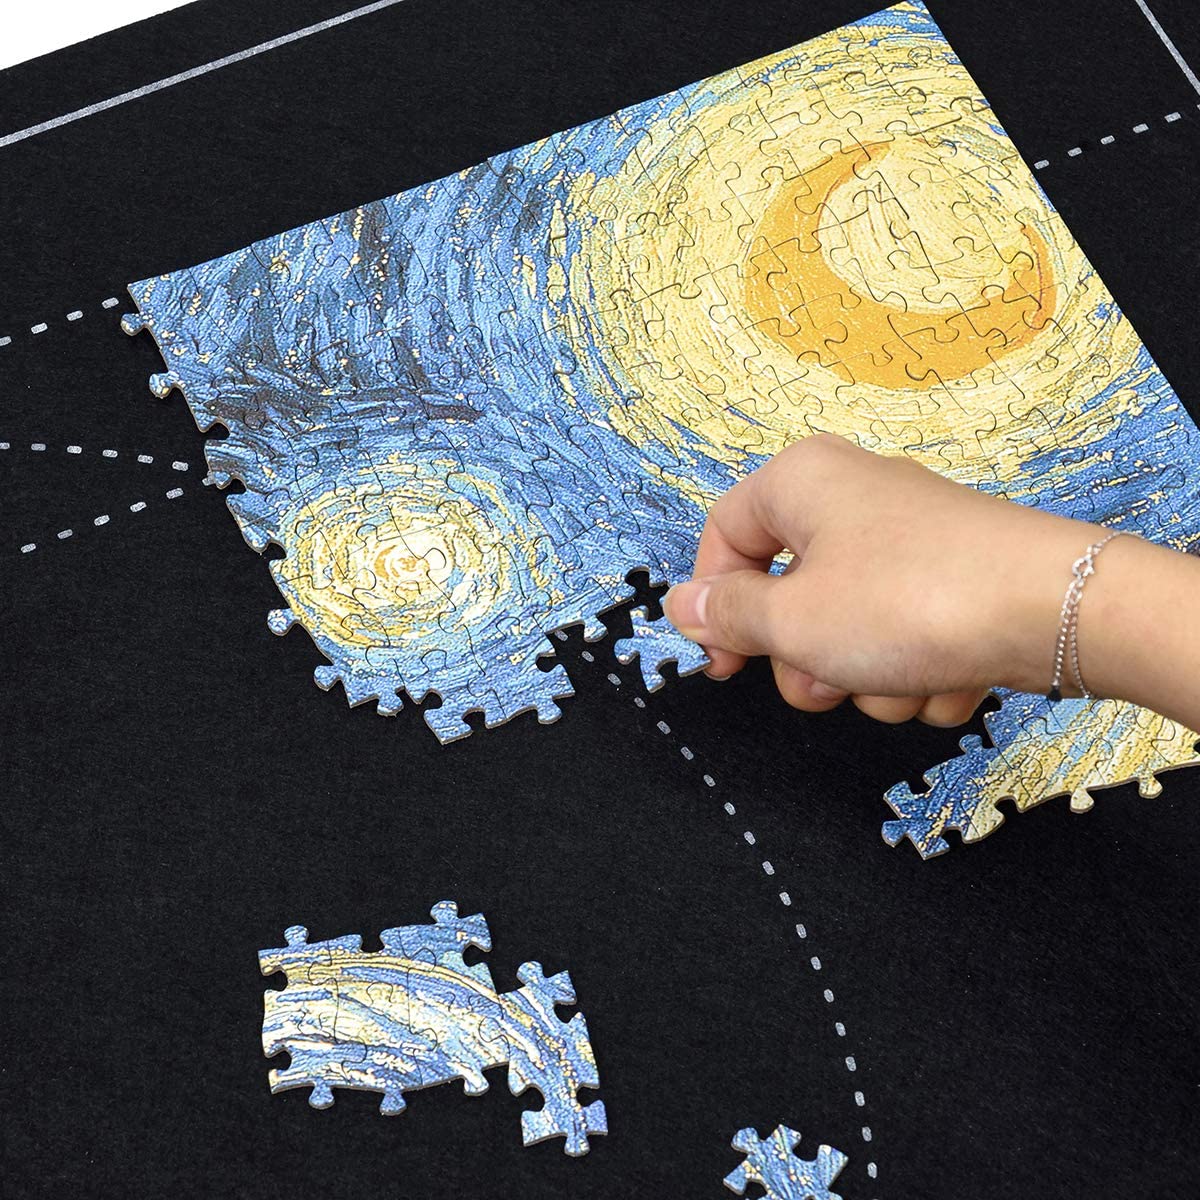 You can easily store and move large puzzles with this puzzle accessory. It is easy to roll up with the inflatable tube. The kit comes with a non-slip felt mat, elastic fasteners and an inflatable tube.